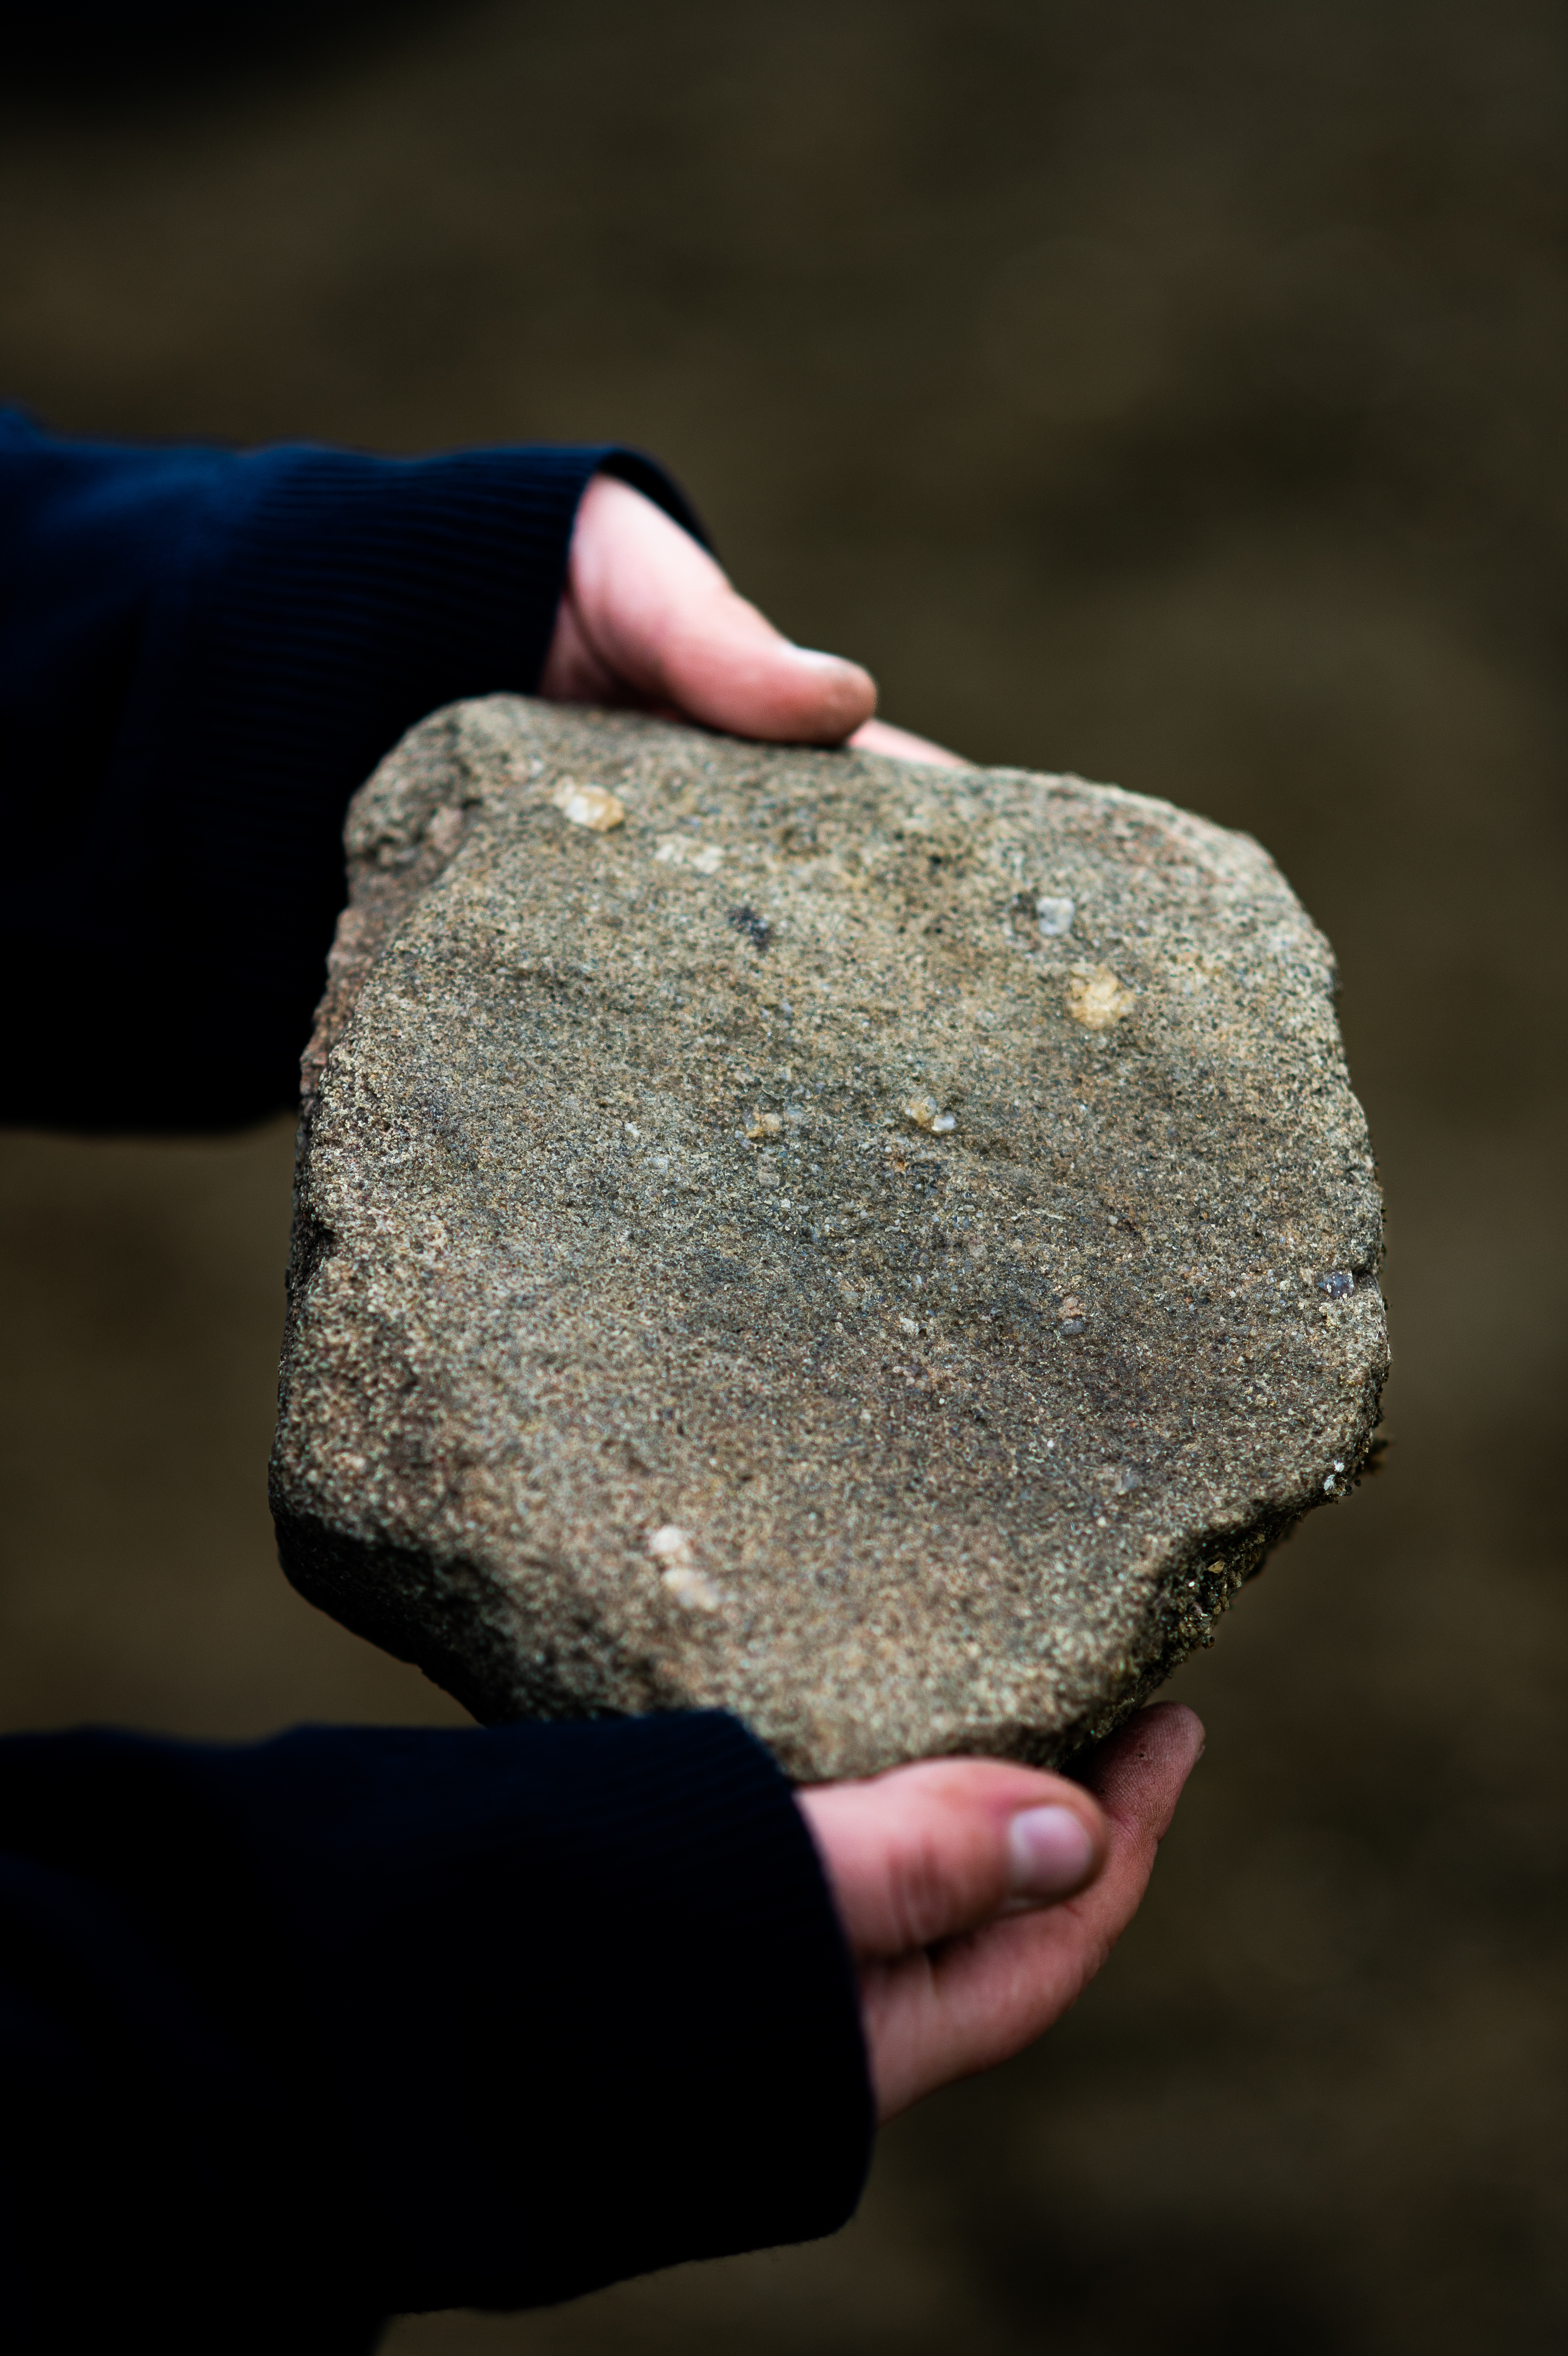 A close up photograph of an archaeologists hands holding a quern stone made of millstone grit, showing the grinding surface.